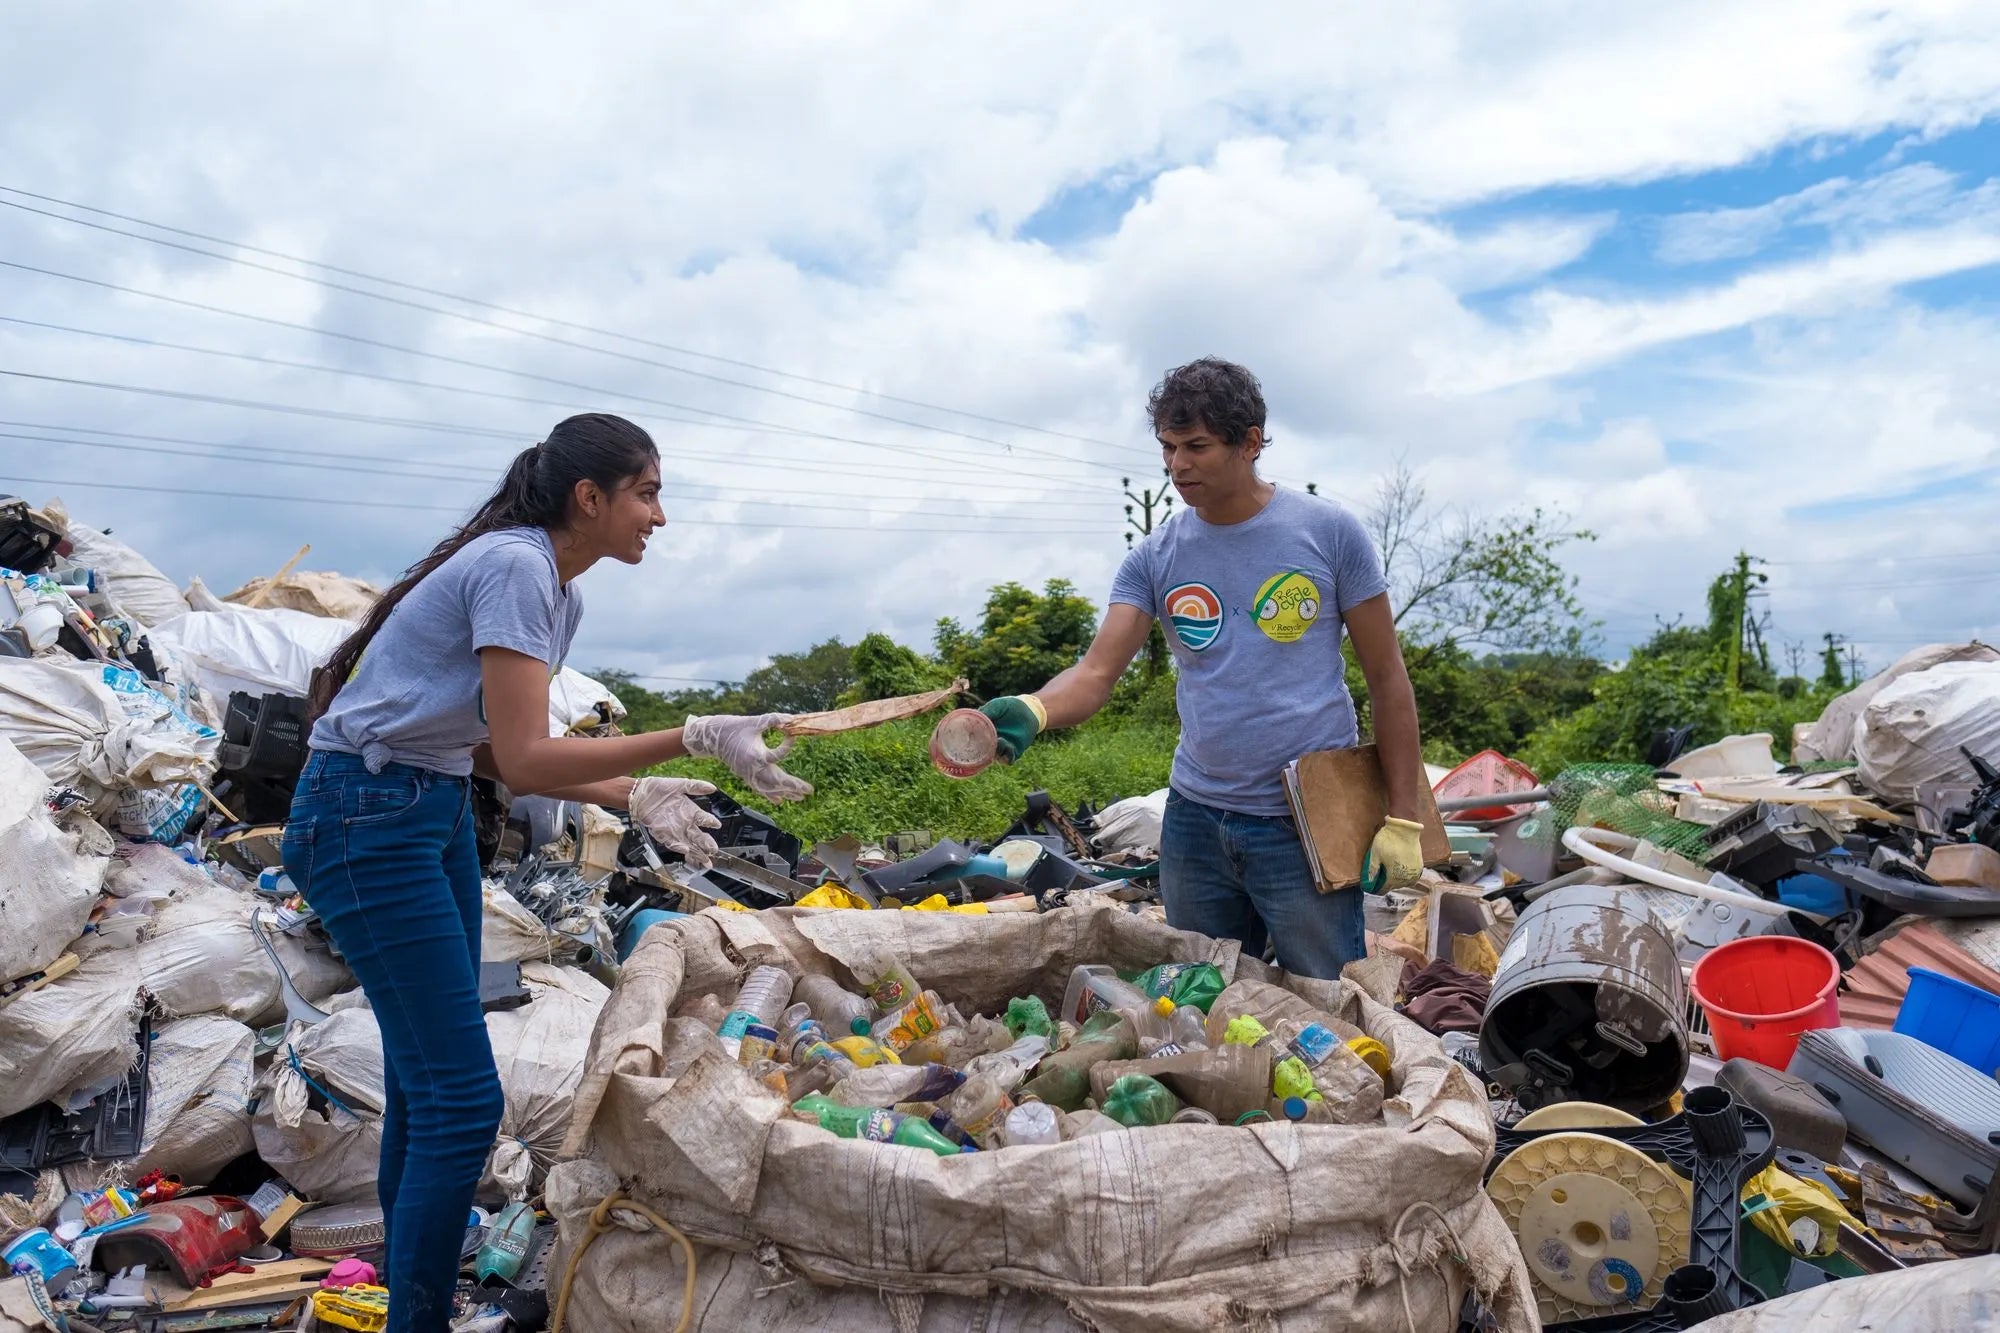 An image of people picking up plastic bottles and rubbish